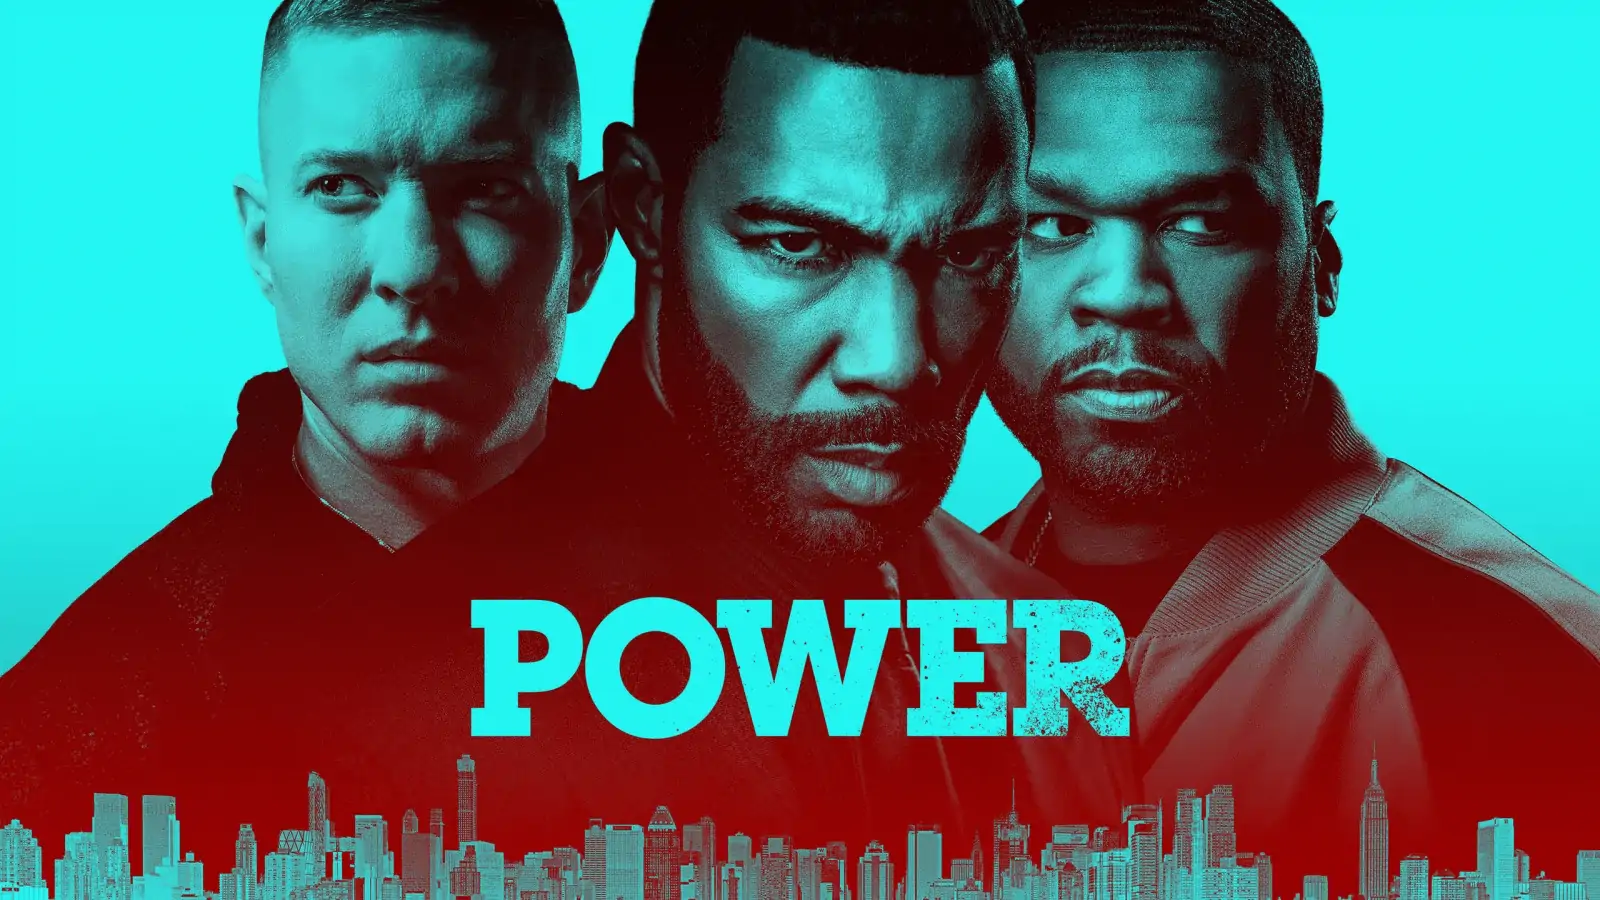 TV Shows Like “Power” (A Look at Other Series with Similar Themes)